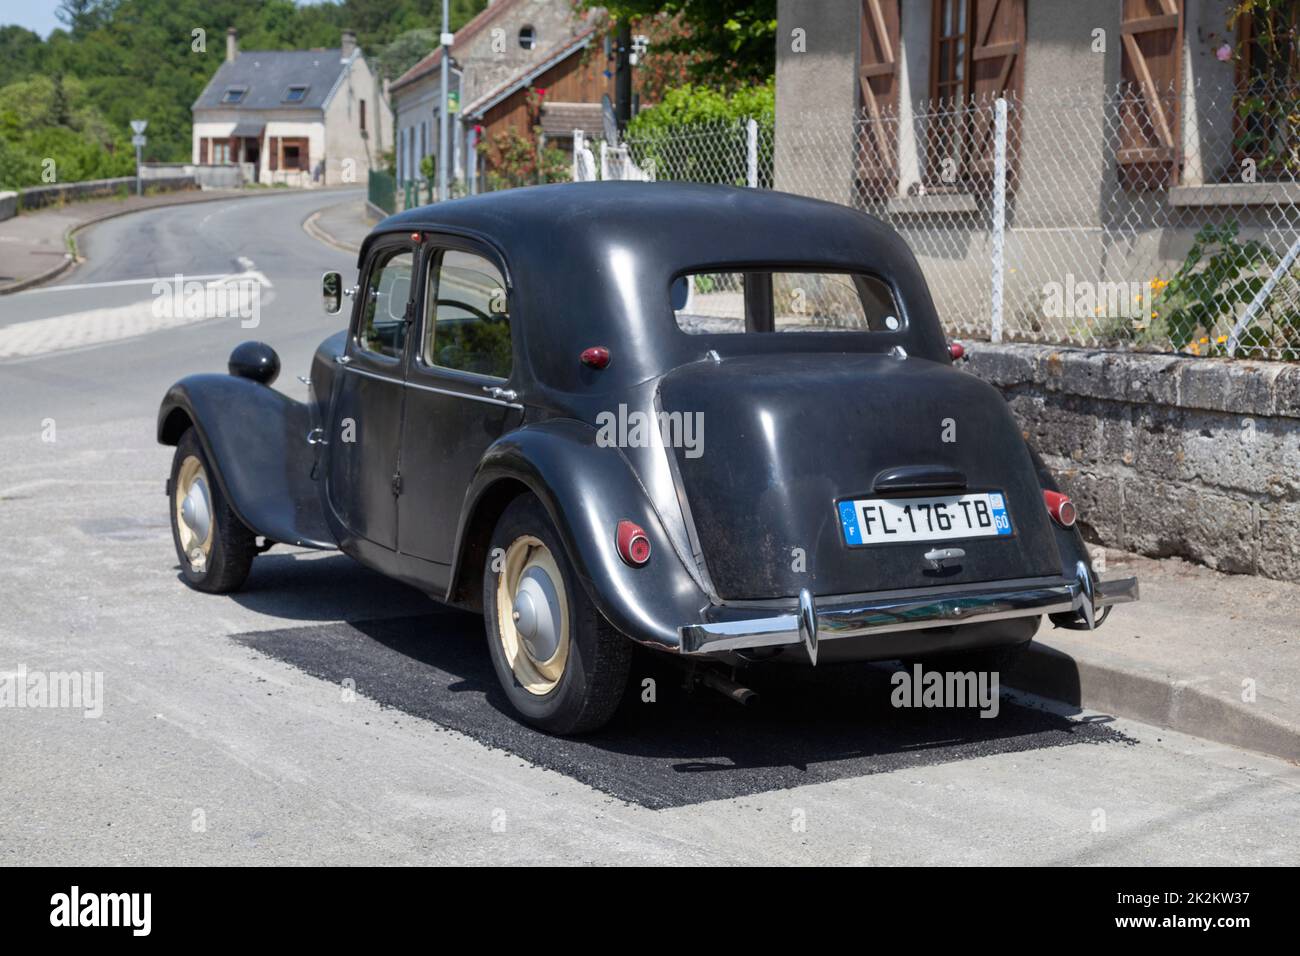 Pierrefonds, France - May 27 2020: Black Citroën Traction Avant 11BL parked in a street. Stock Photo